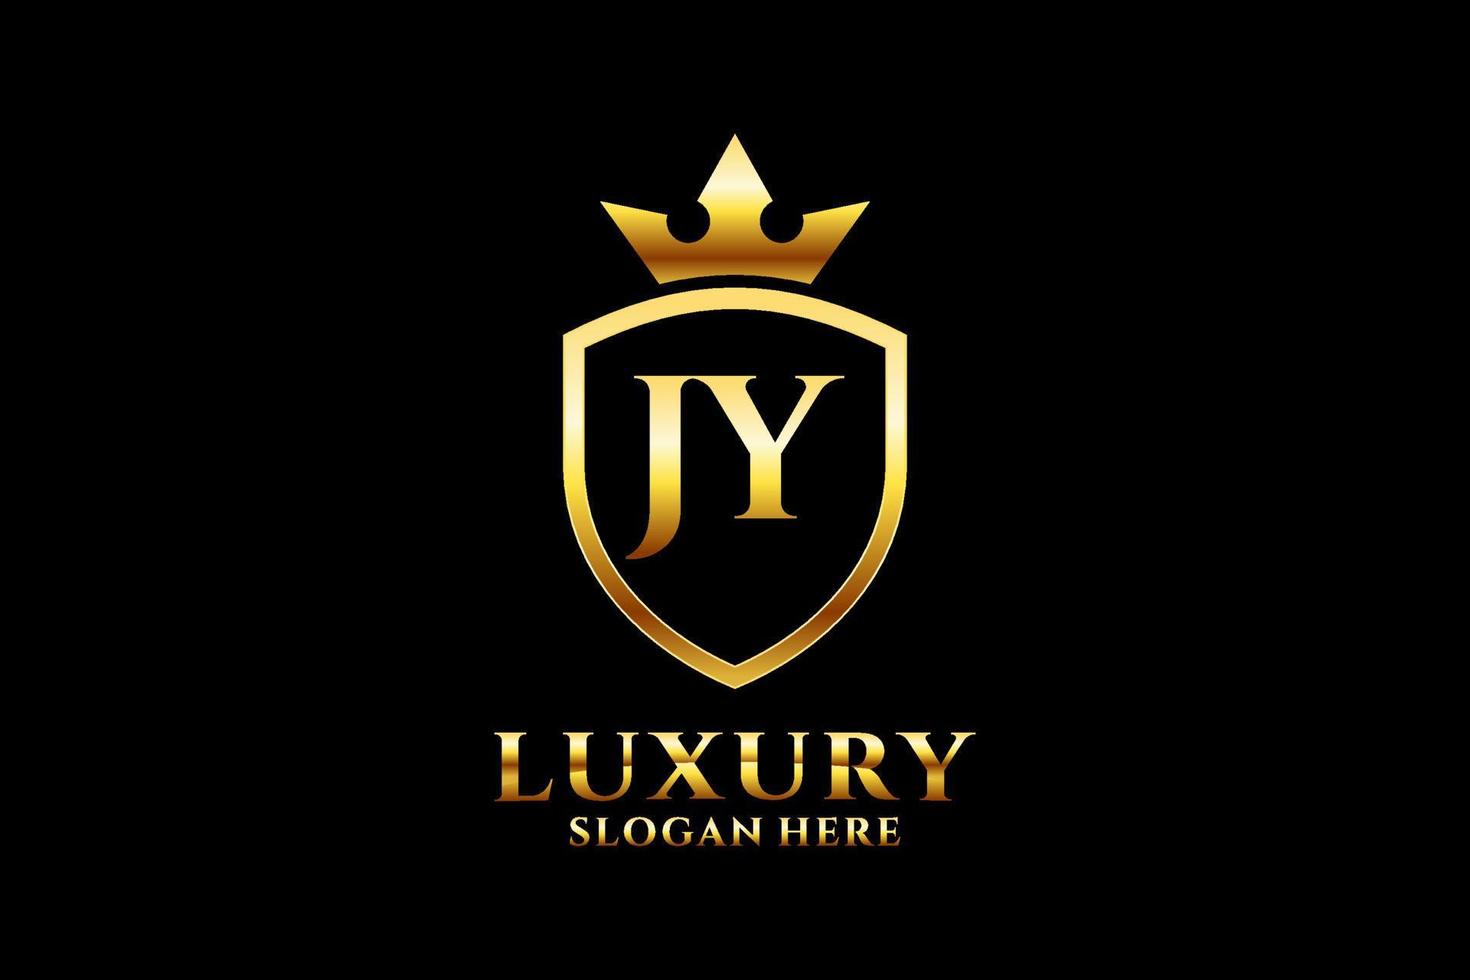 initial JY elegant luxury monogram logo or badge template with scrolls and royal crown - perfect for luxurious branding projects vector